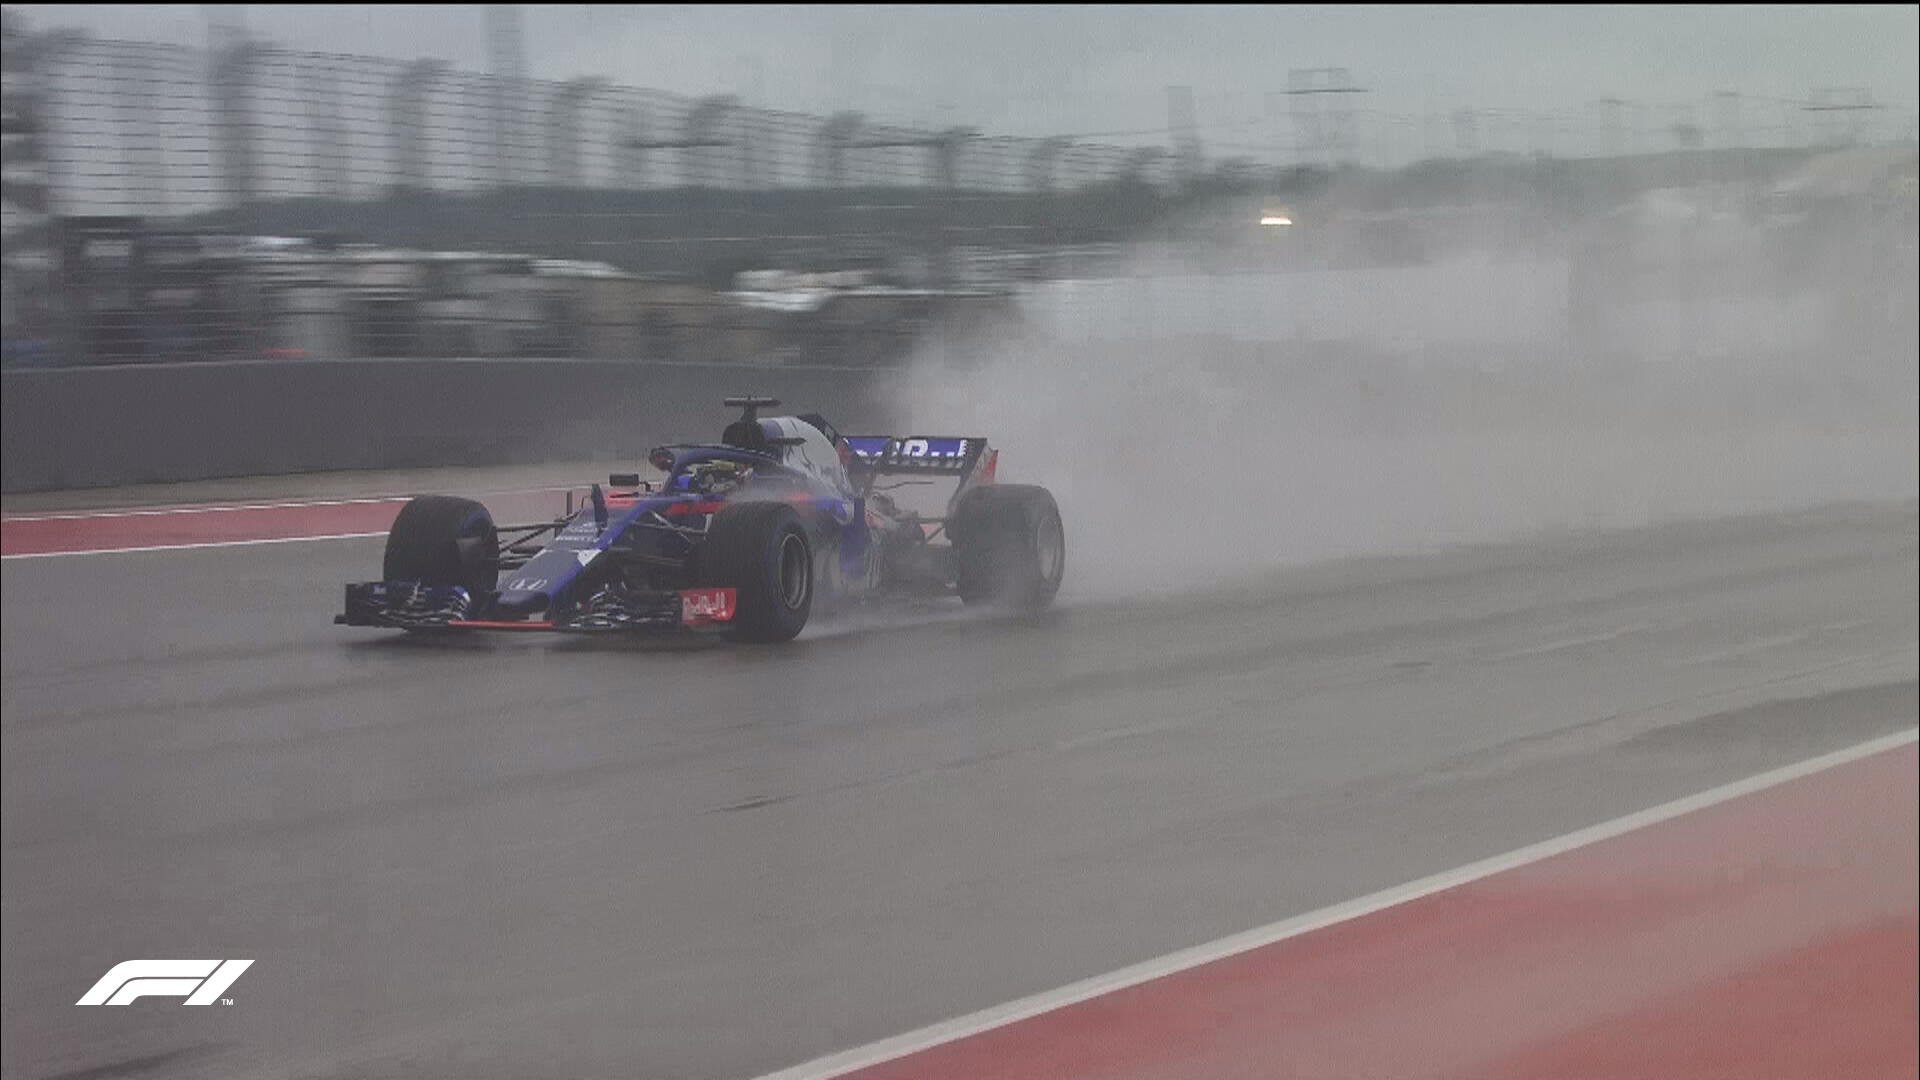 Formula 1 on X: Some epic rooster tails coming off the back of  @gelaelized's car! Rather fitting considering @ToroRosso's new sponsor 🐔  #USGP 🇺🇸 #F1  / X